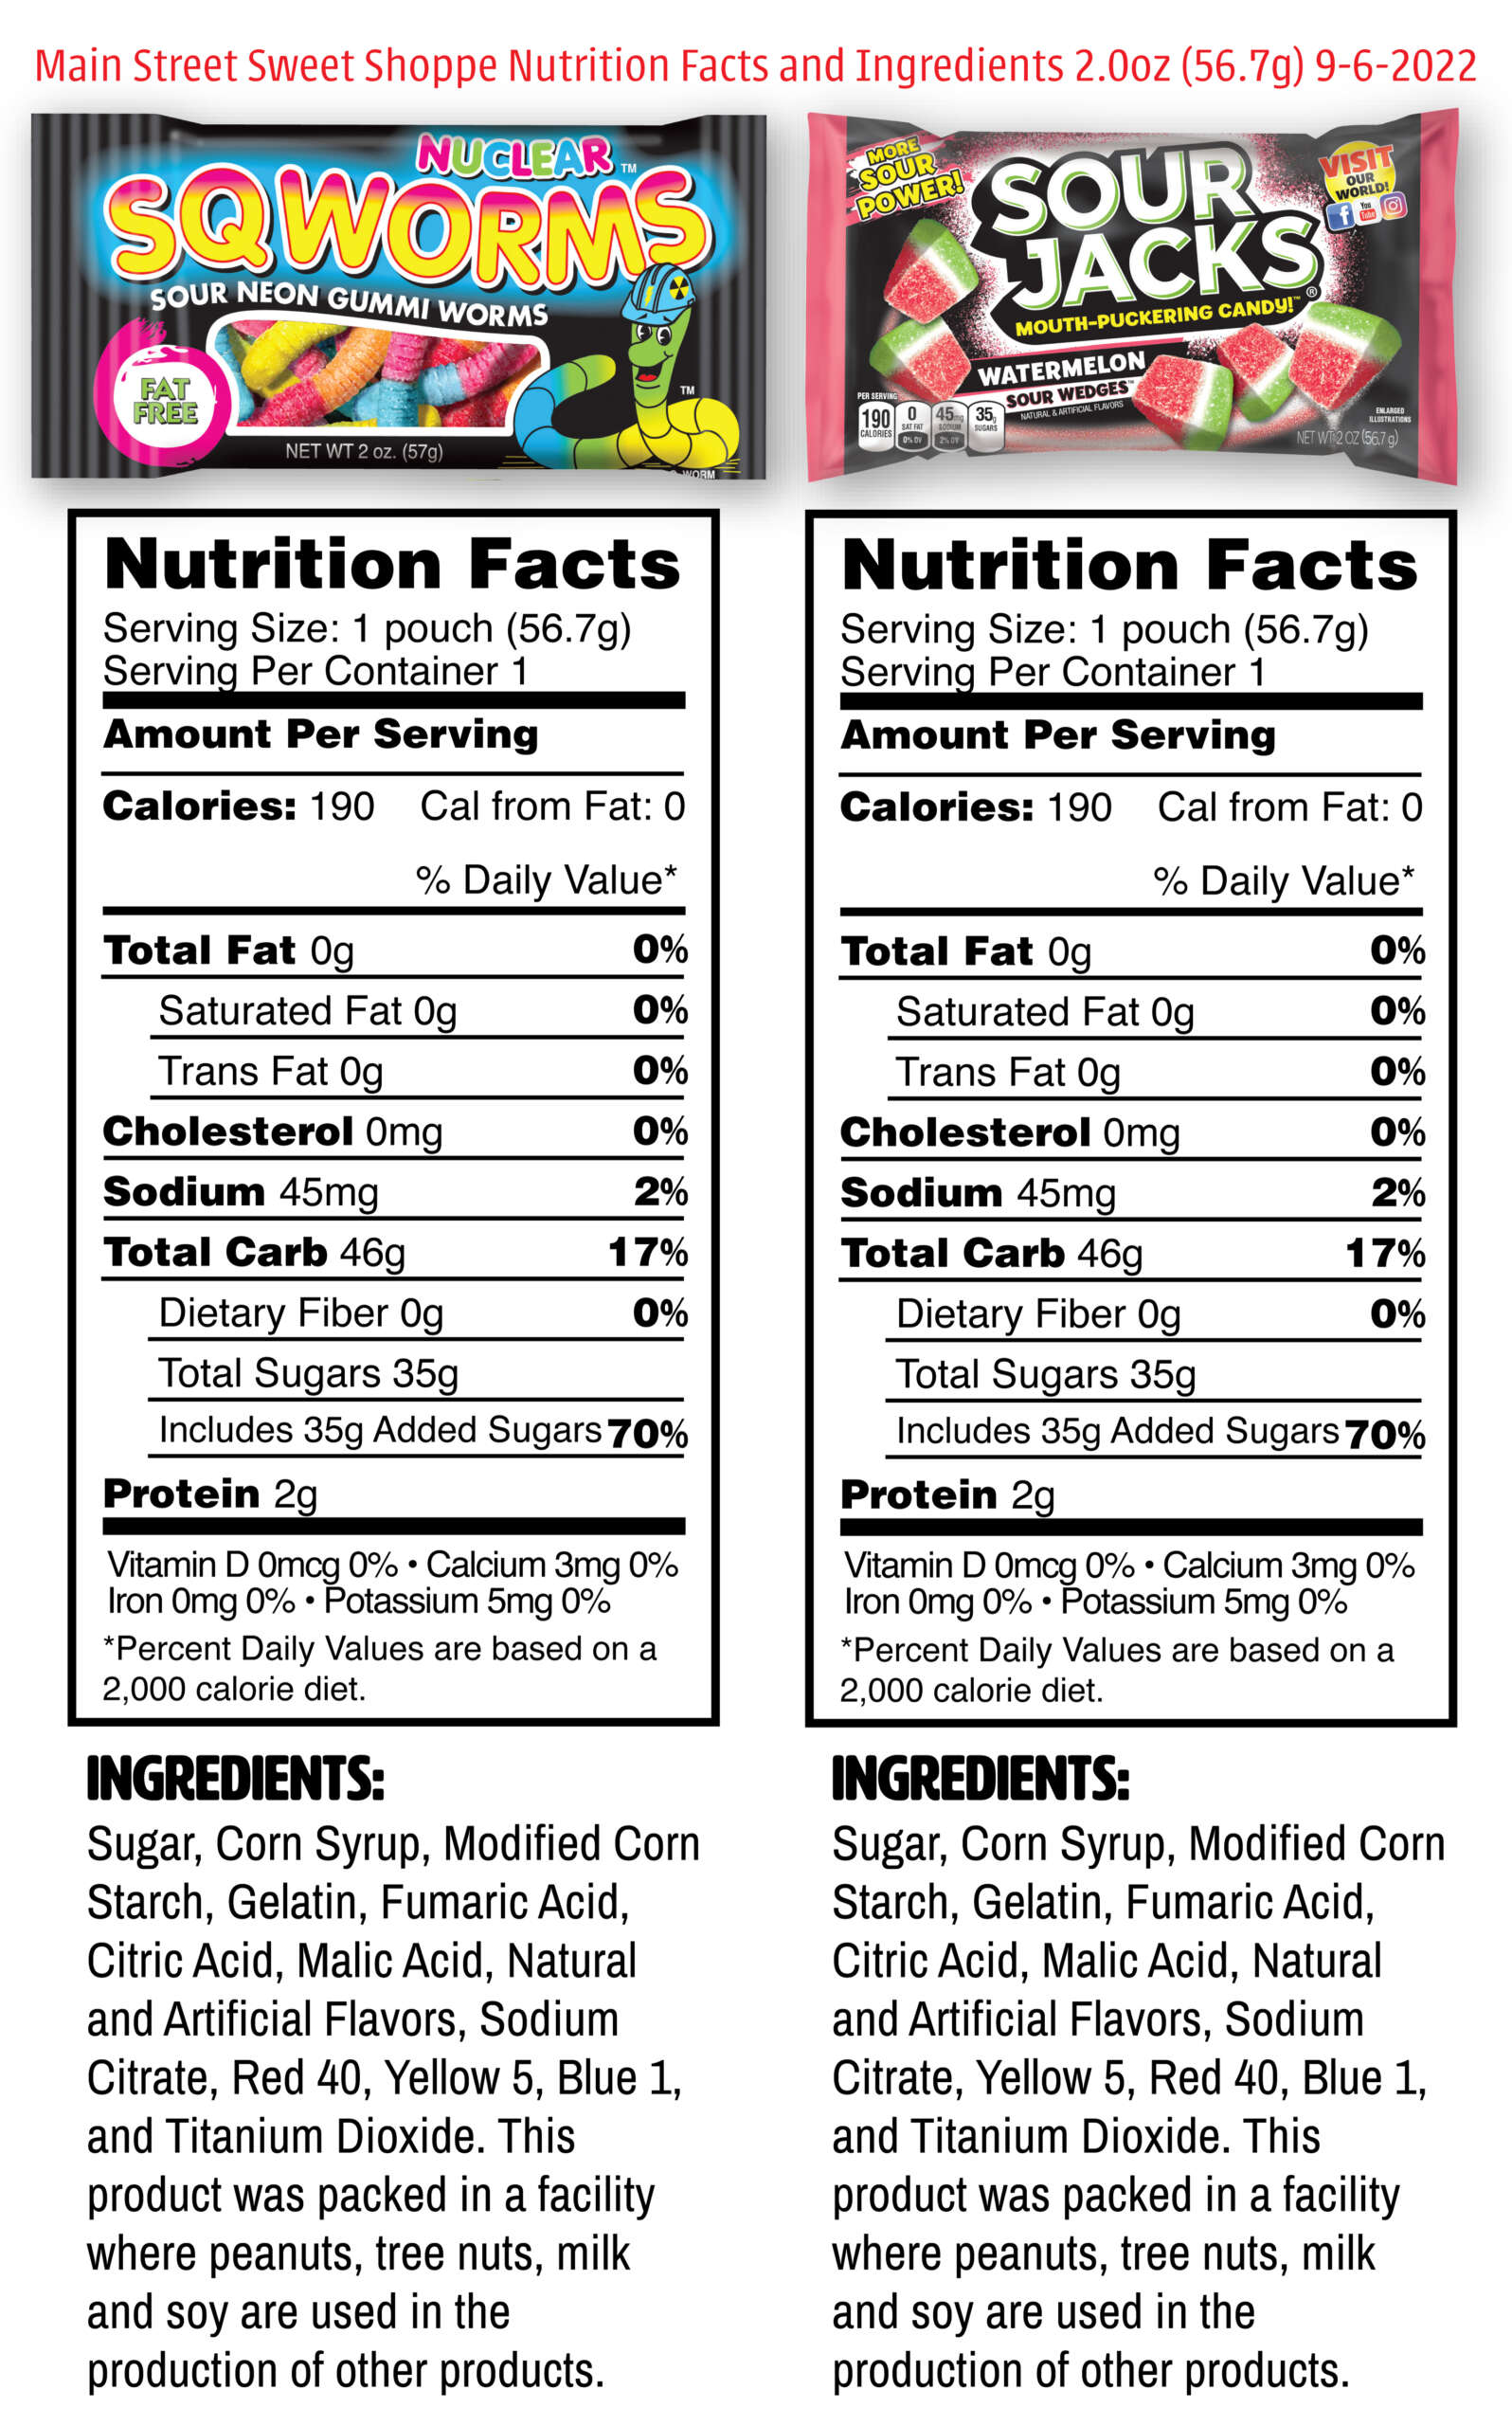 Main Street Sweet Shoppe Nutrition Facts and Ingredients